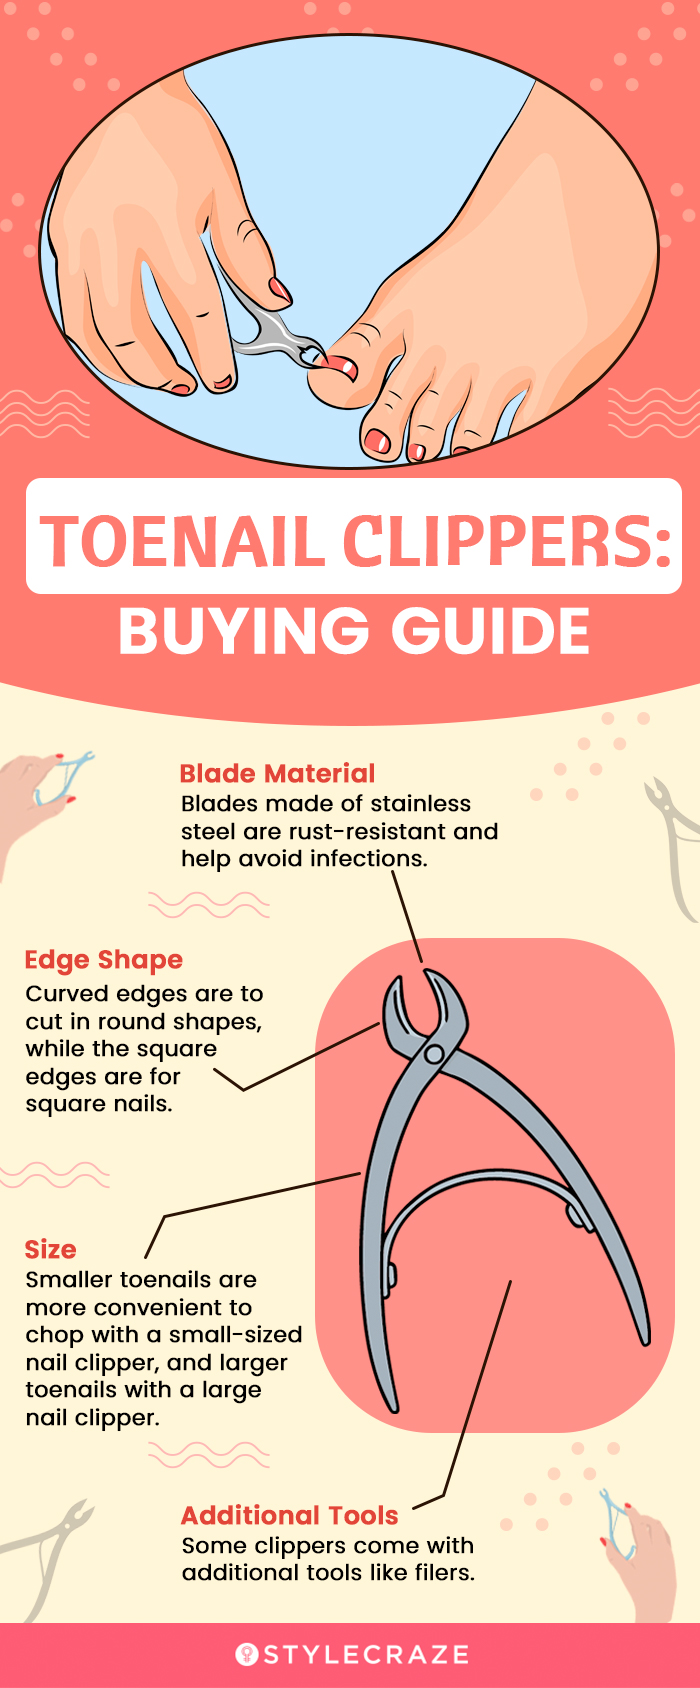 Toenail Clippers: Buying Guide (infographic)